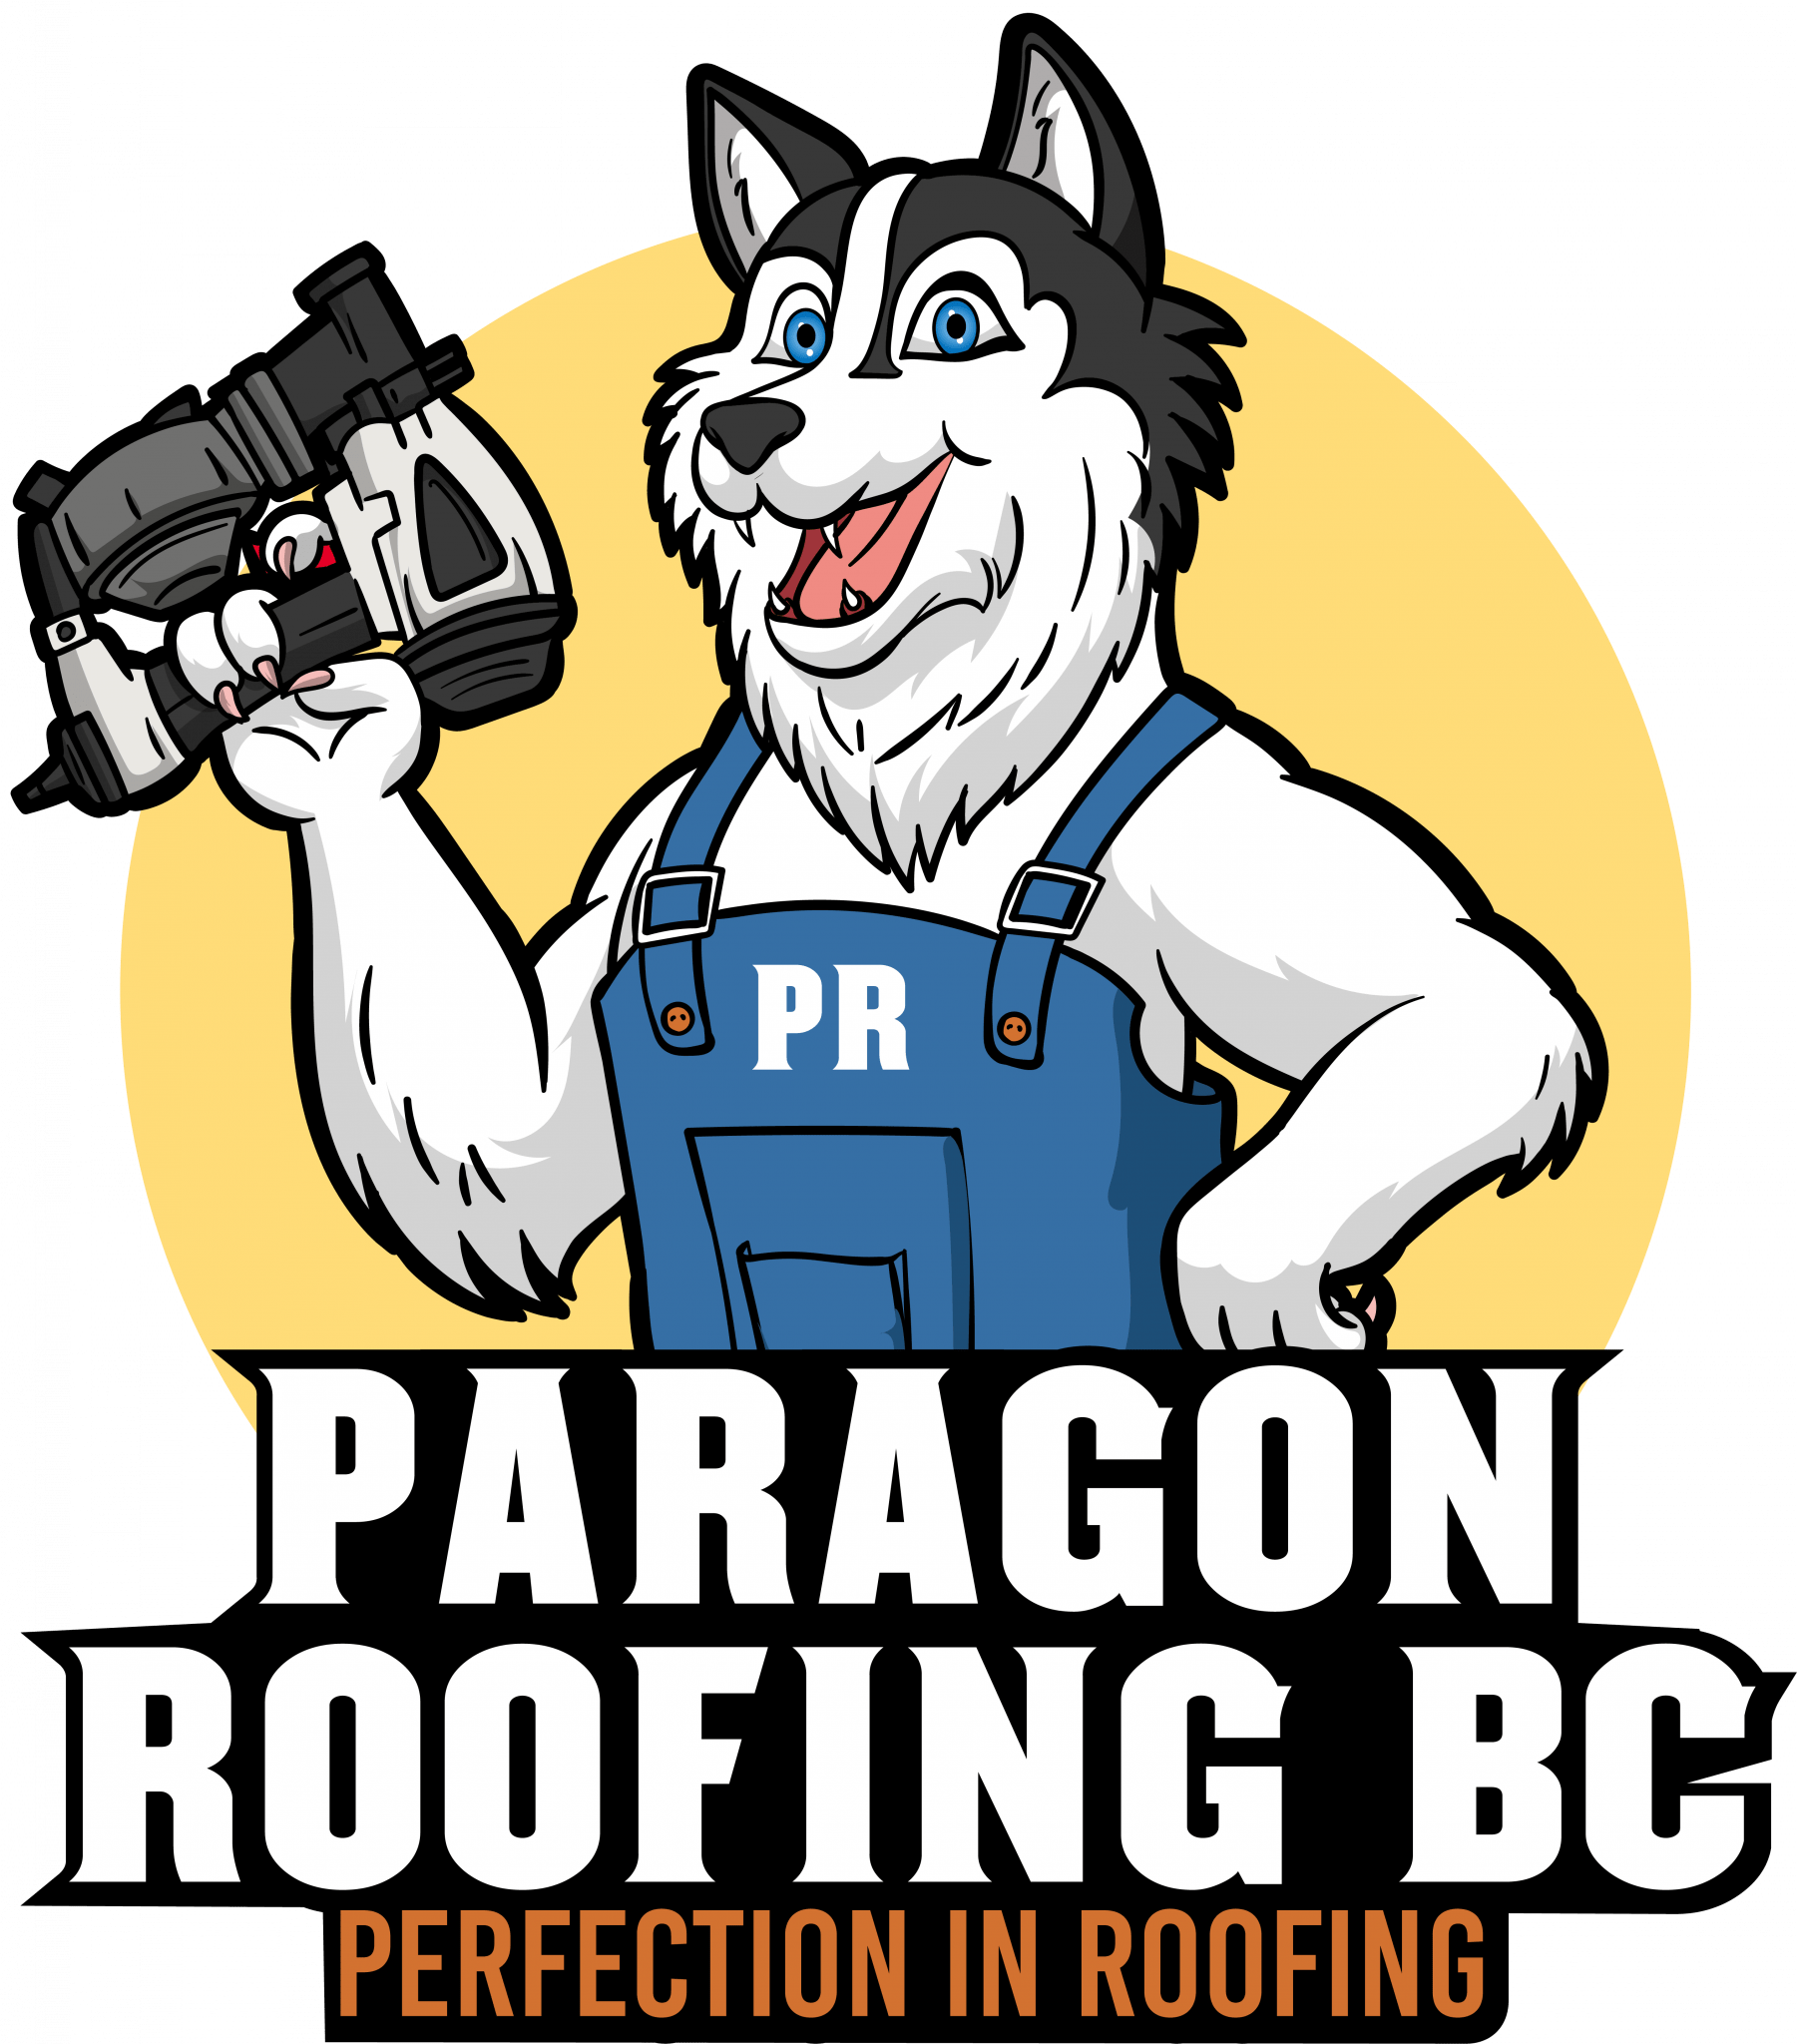 Paragon Roofing BC logo of the best roofing company in vancouver